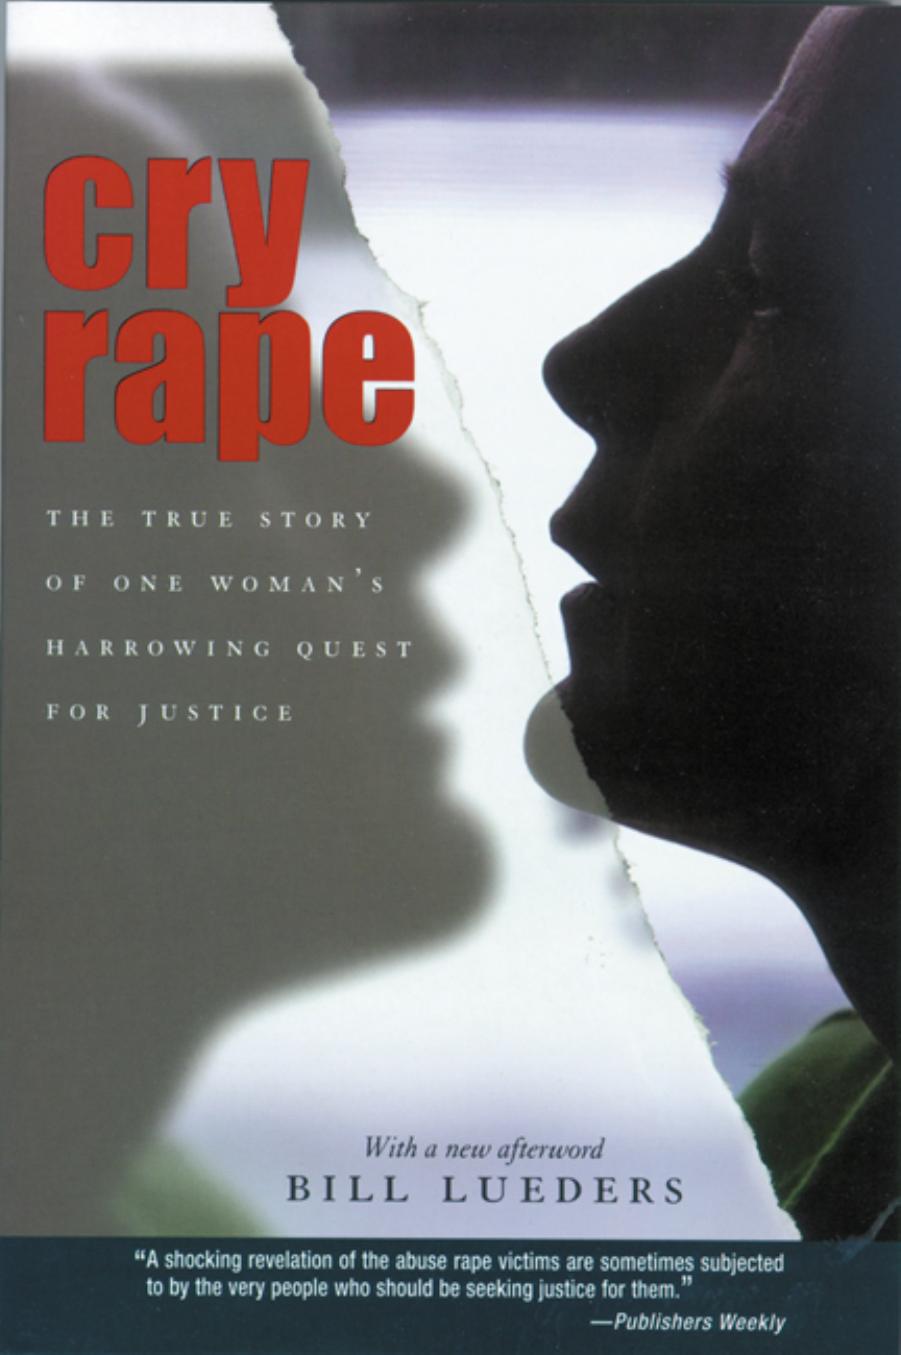 Cry Rape: The True Story of One Woman's Harrowing Quest for Justice by Bill Lueders